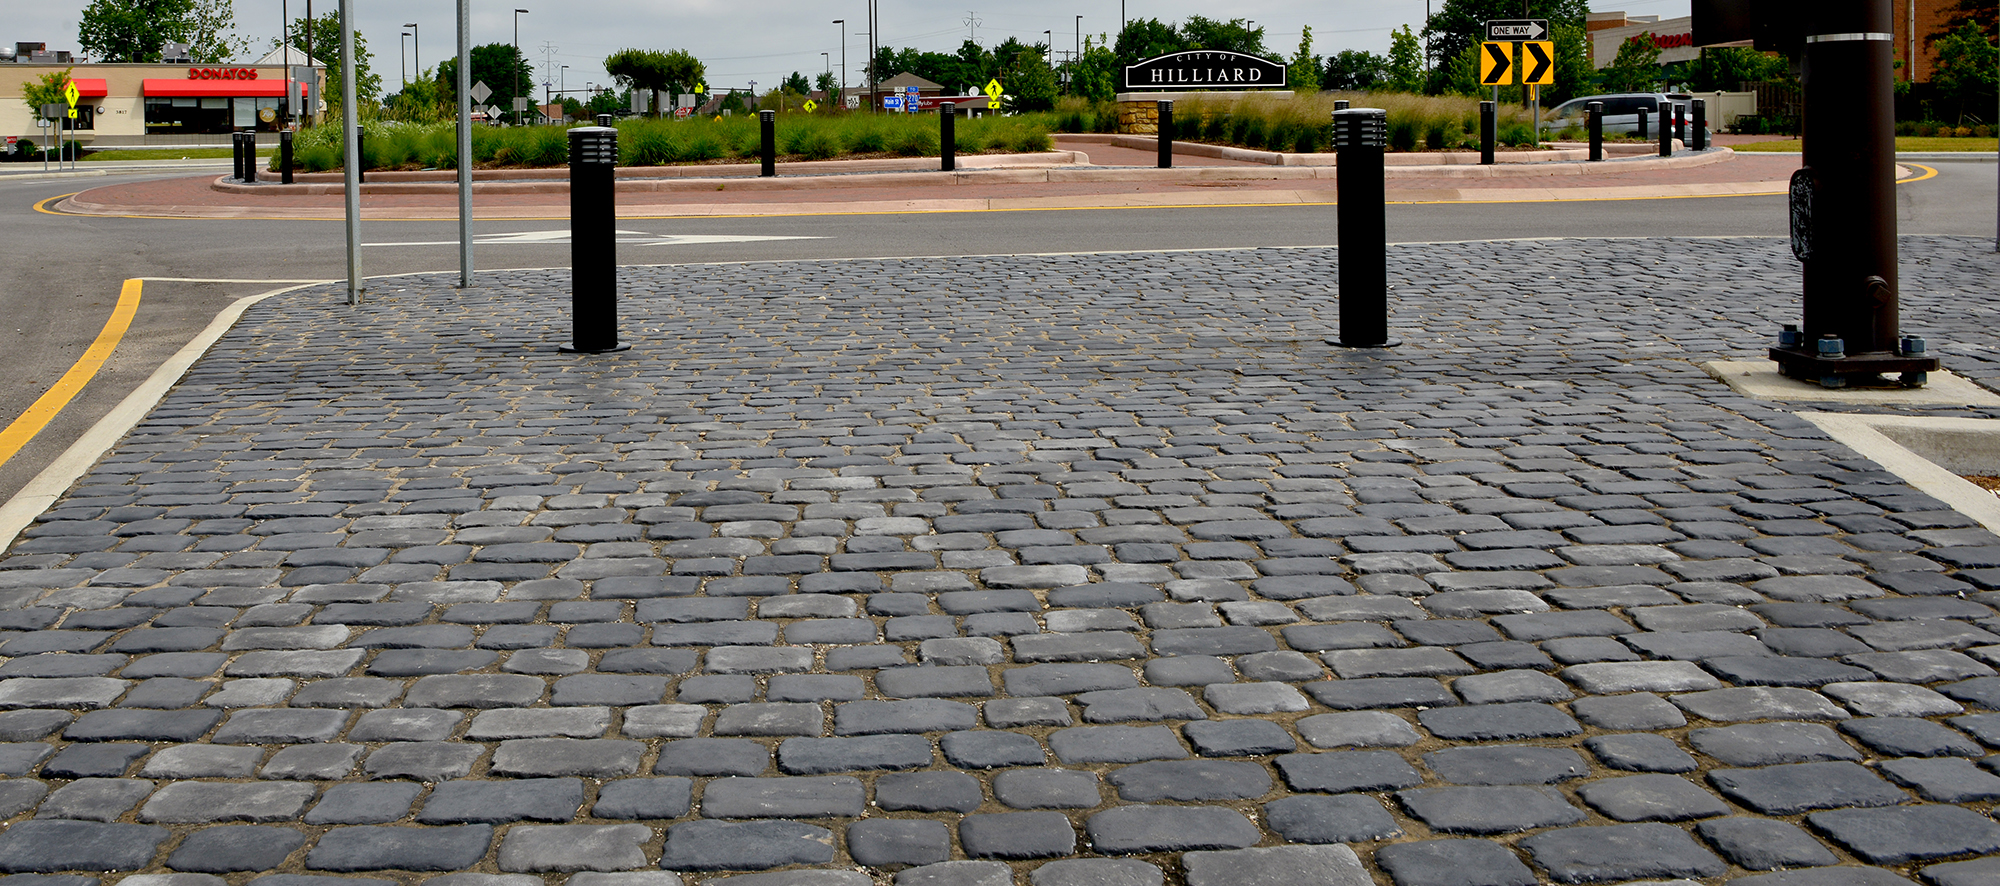 Alongside stores and the City of Hilliard sign at the other end of the roundabout, the walkway is lined with two-toned Courtstone pavers.